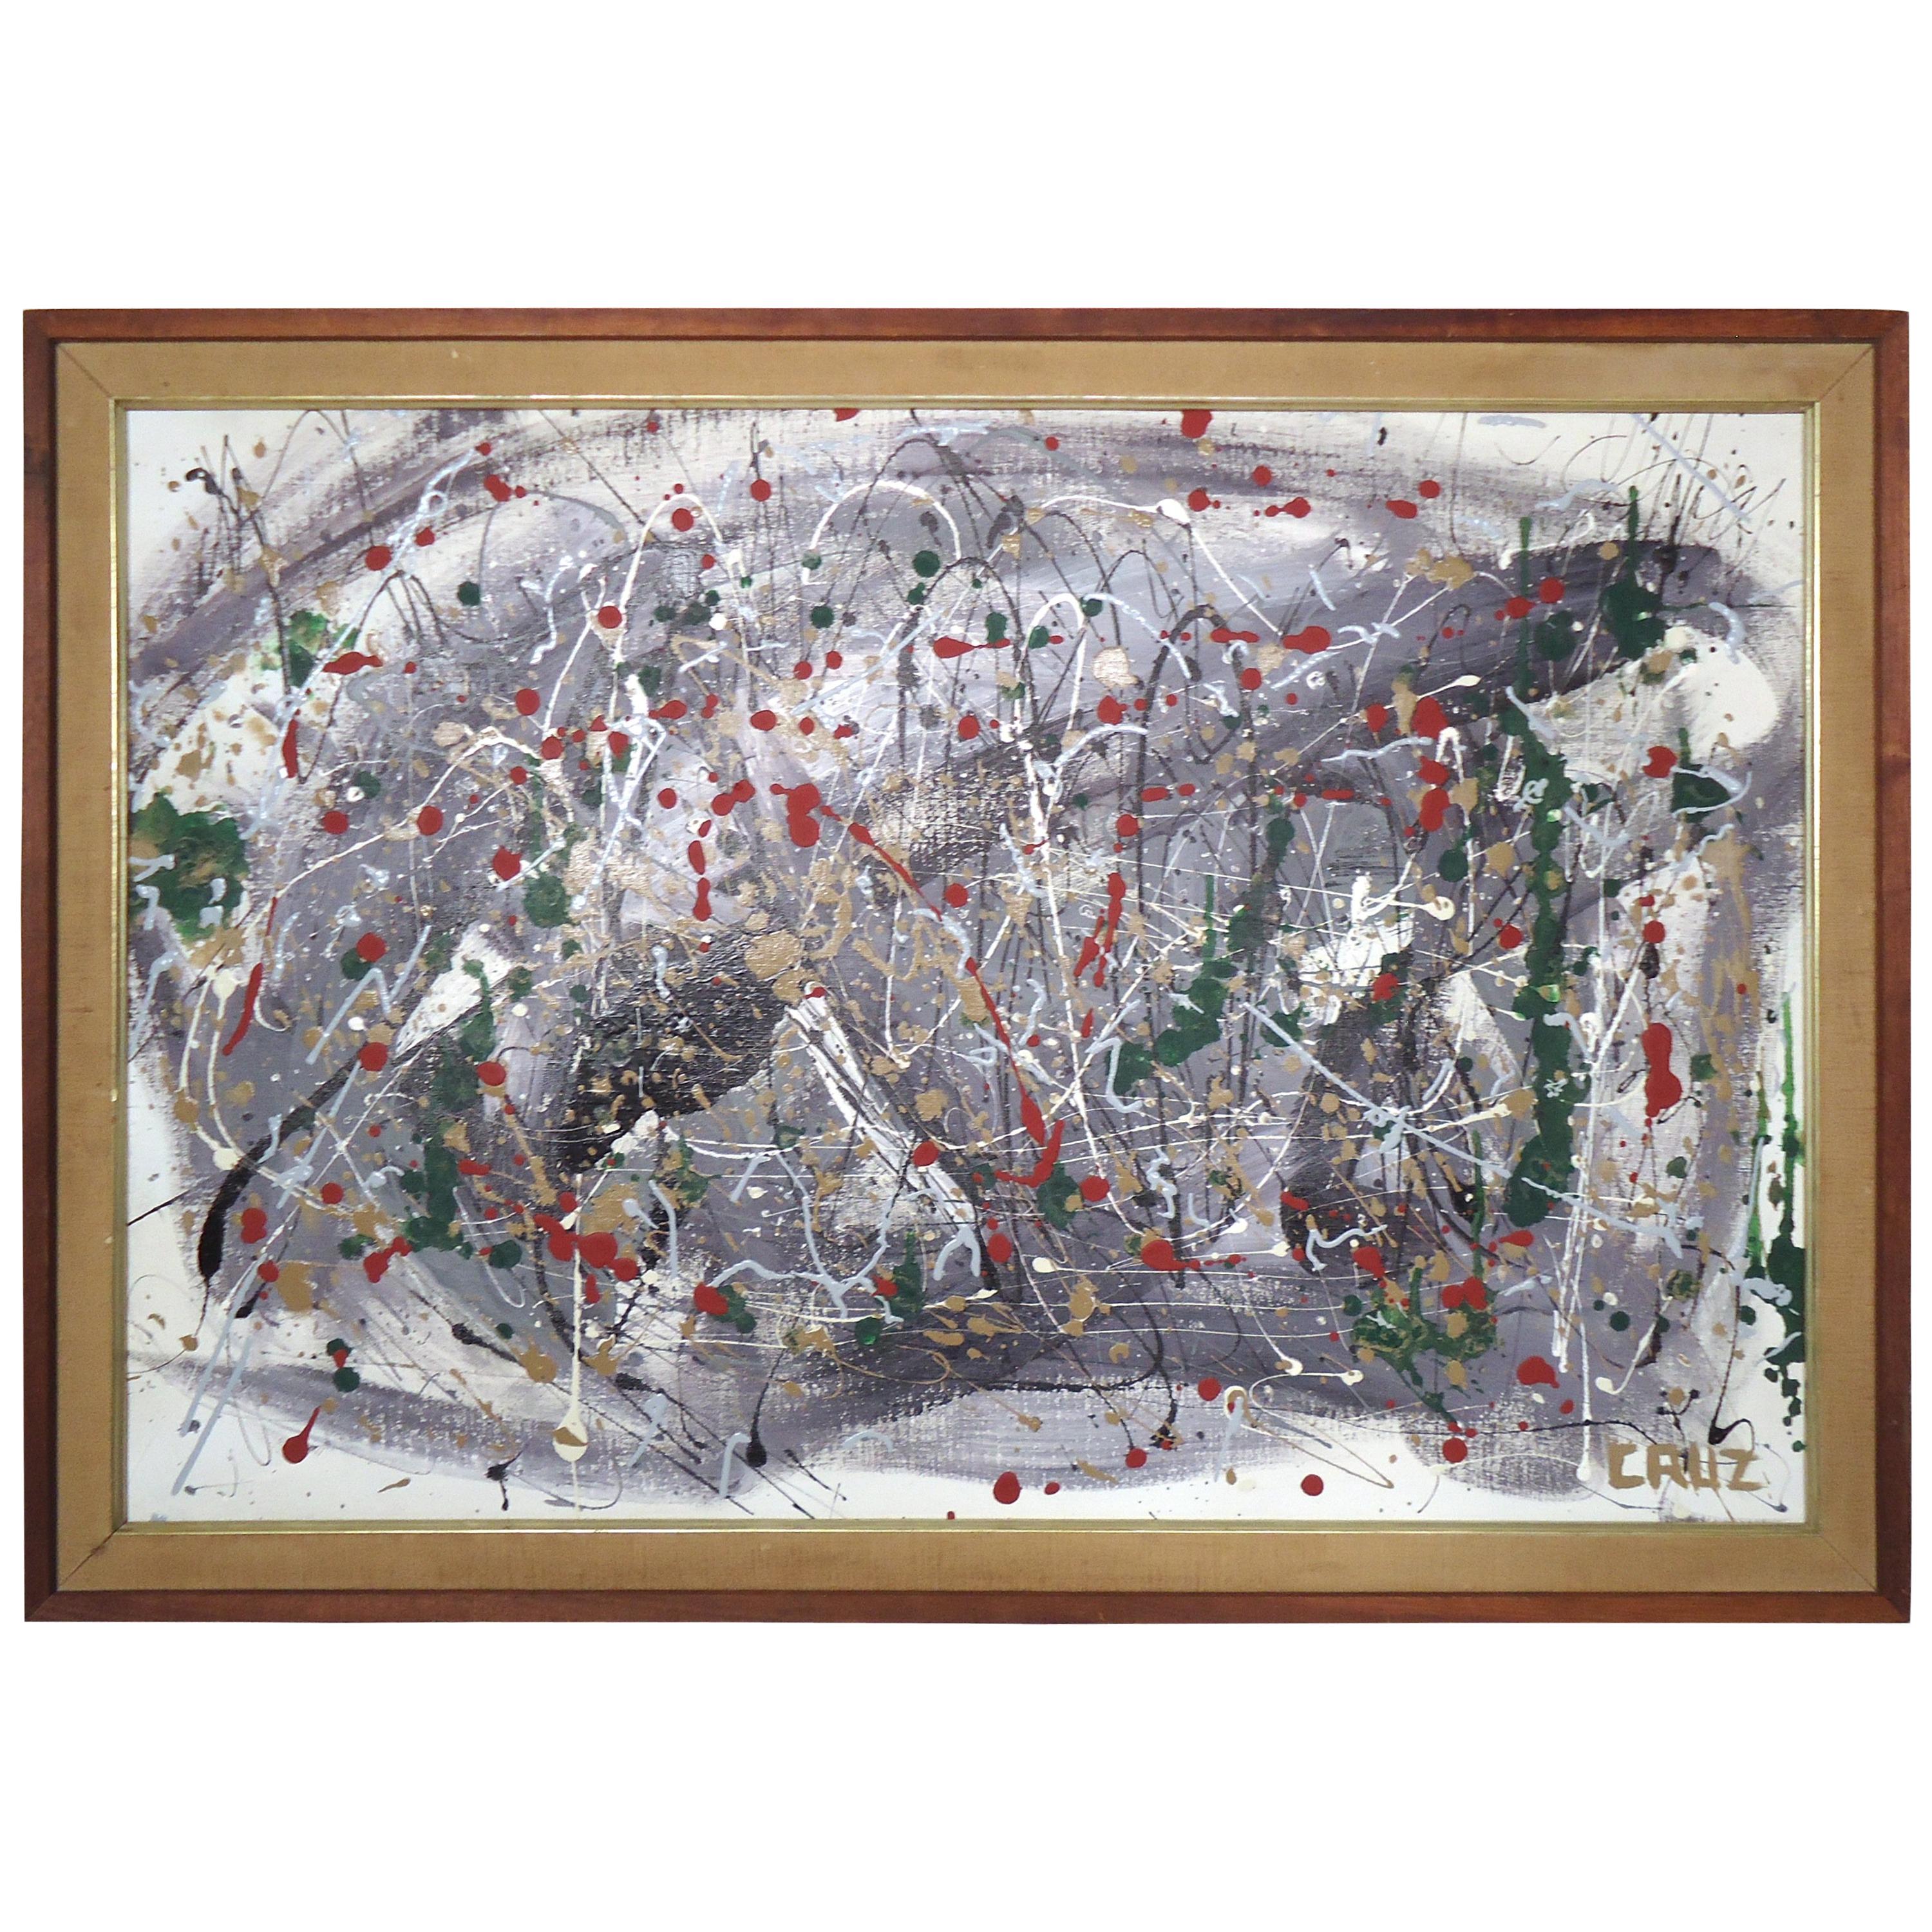 Abstract Splatter Painting Signed by Artist